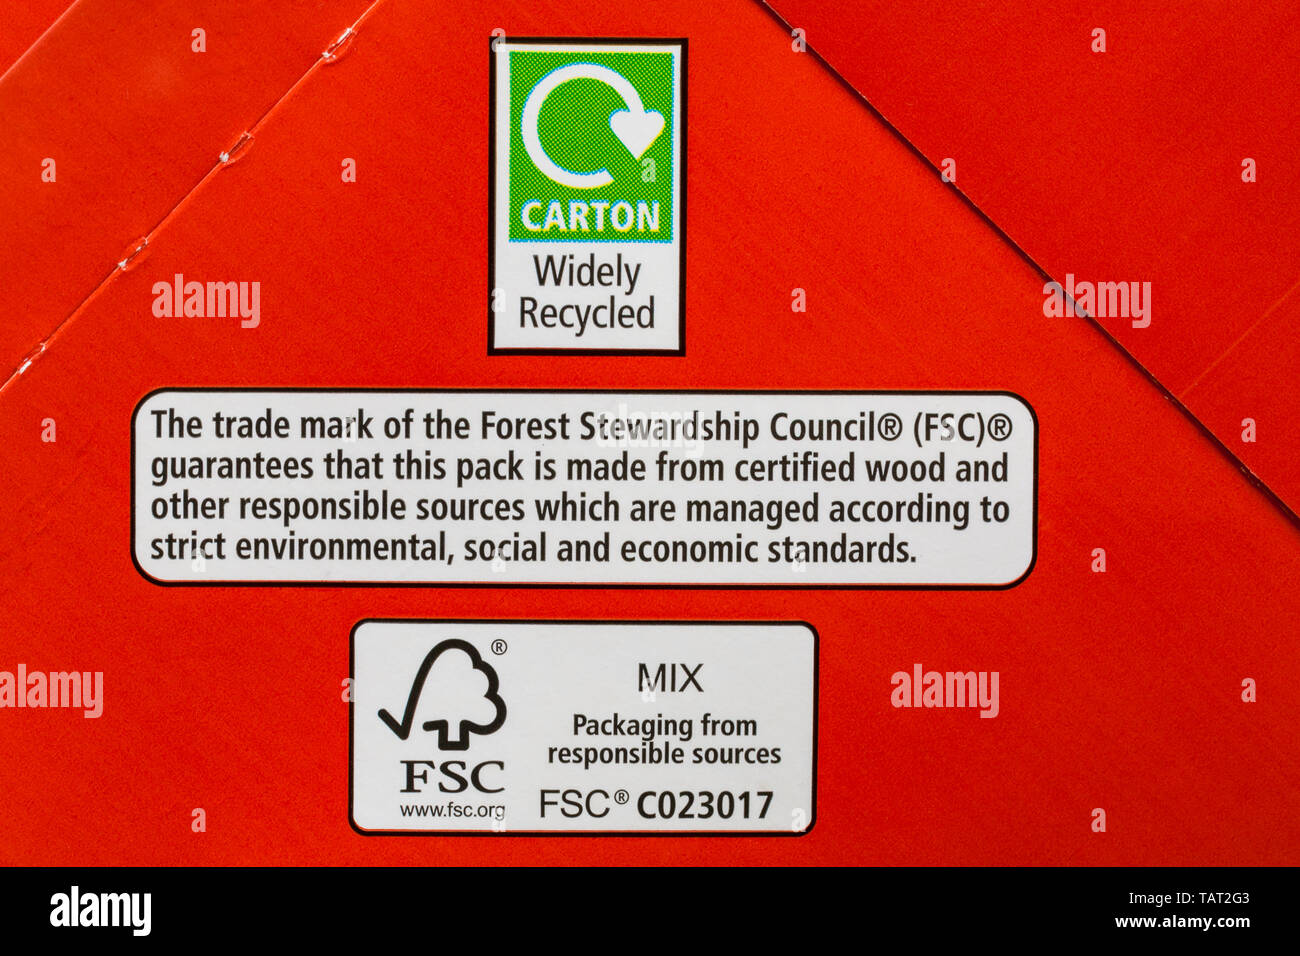 carton widely recycled on pack of Tesco smoked ham & cheddar sandwiches - disposal recycling recycle logo symbol Stock Photo